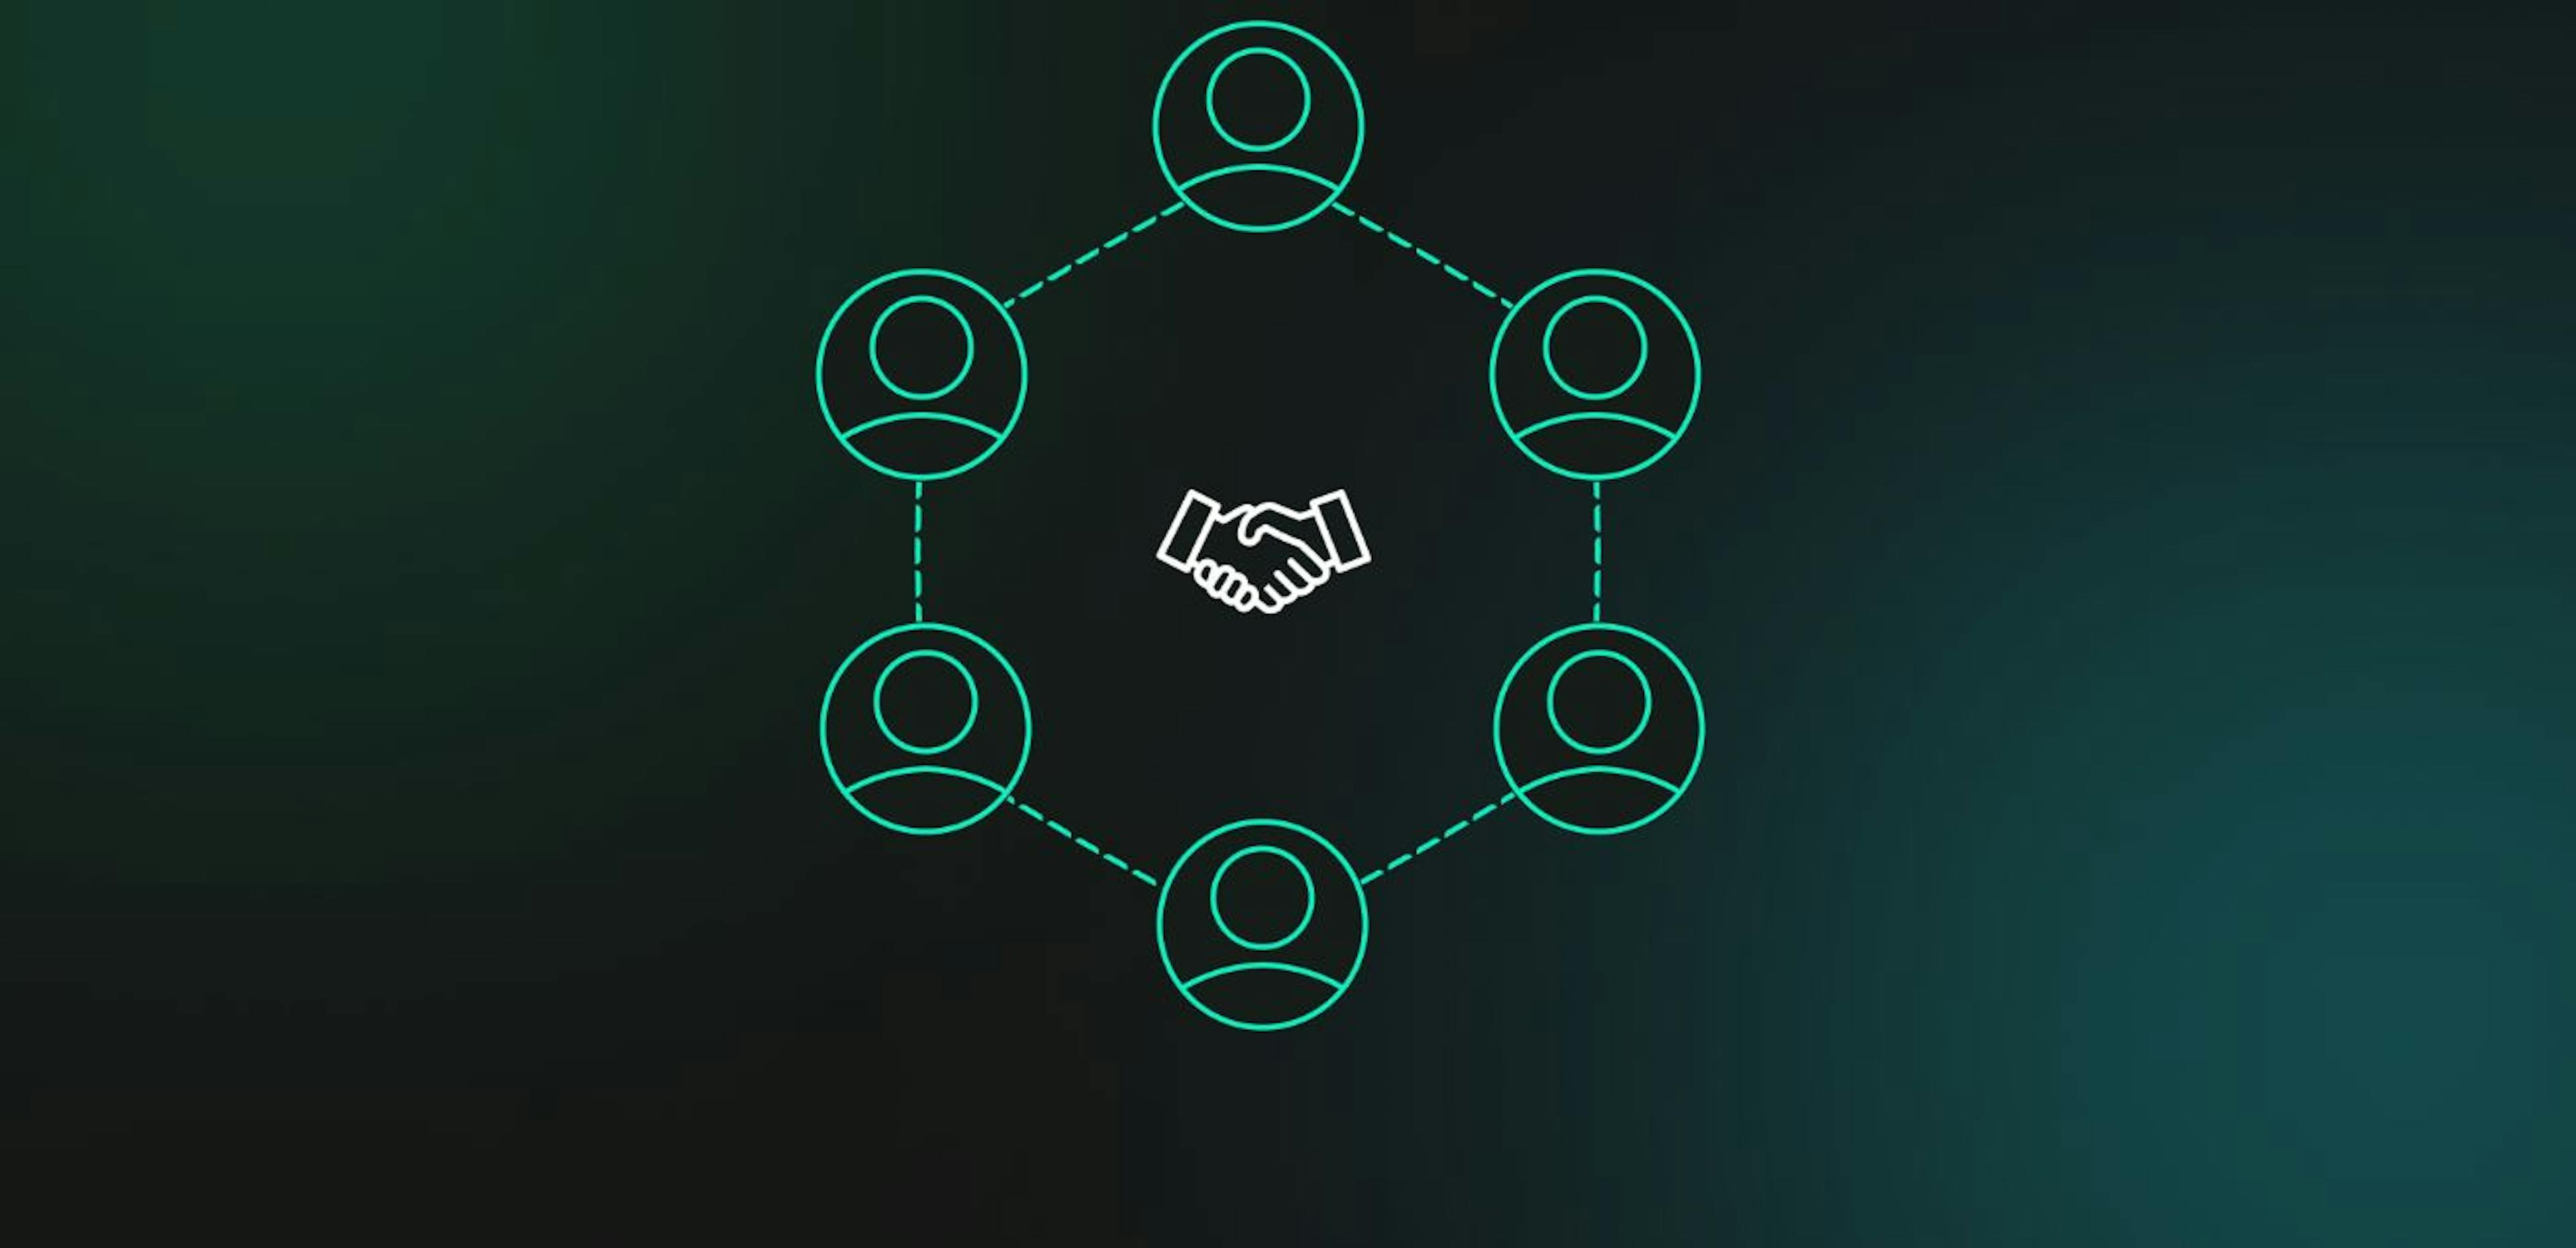 Network participants come to an agreement about adding a new block according to a set of rules called a consensus mechanism